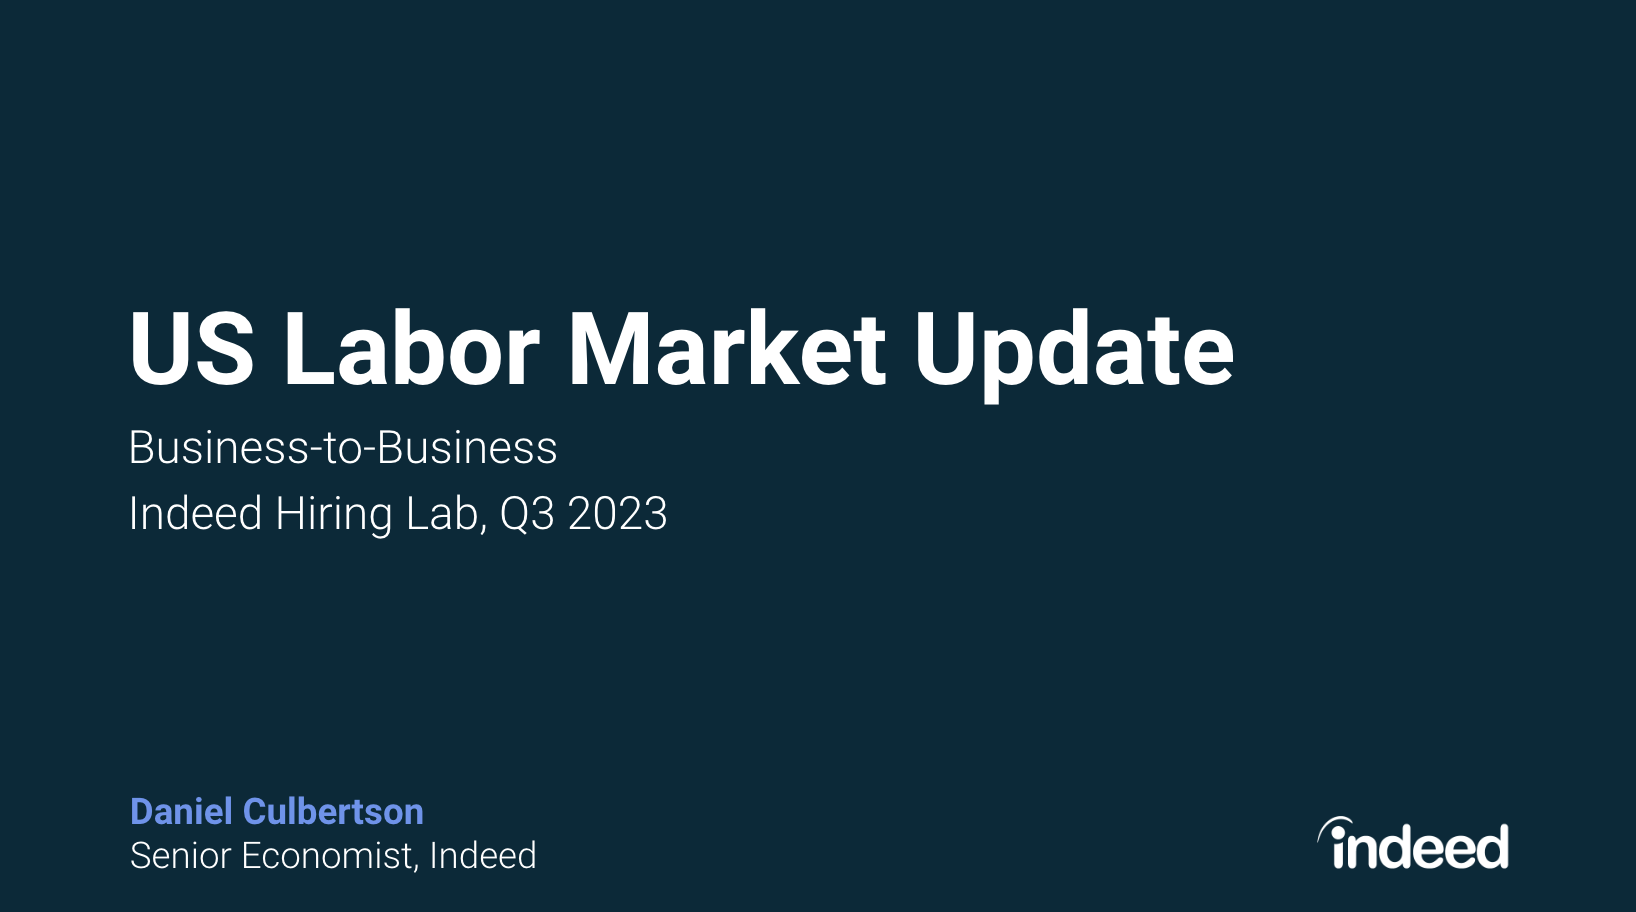 US Labor Market Update Business-to-Business Q3 2023